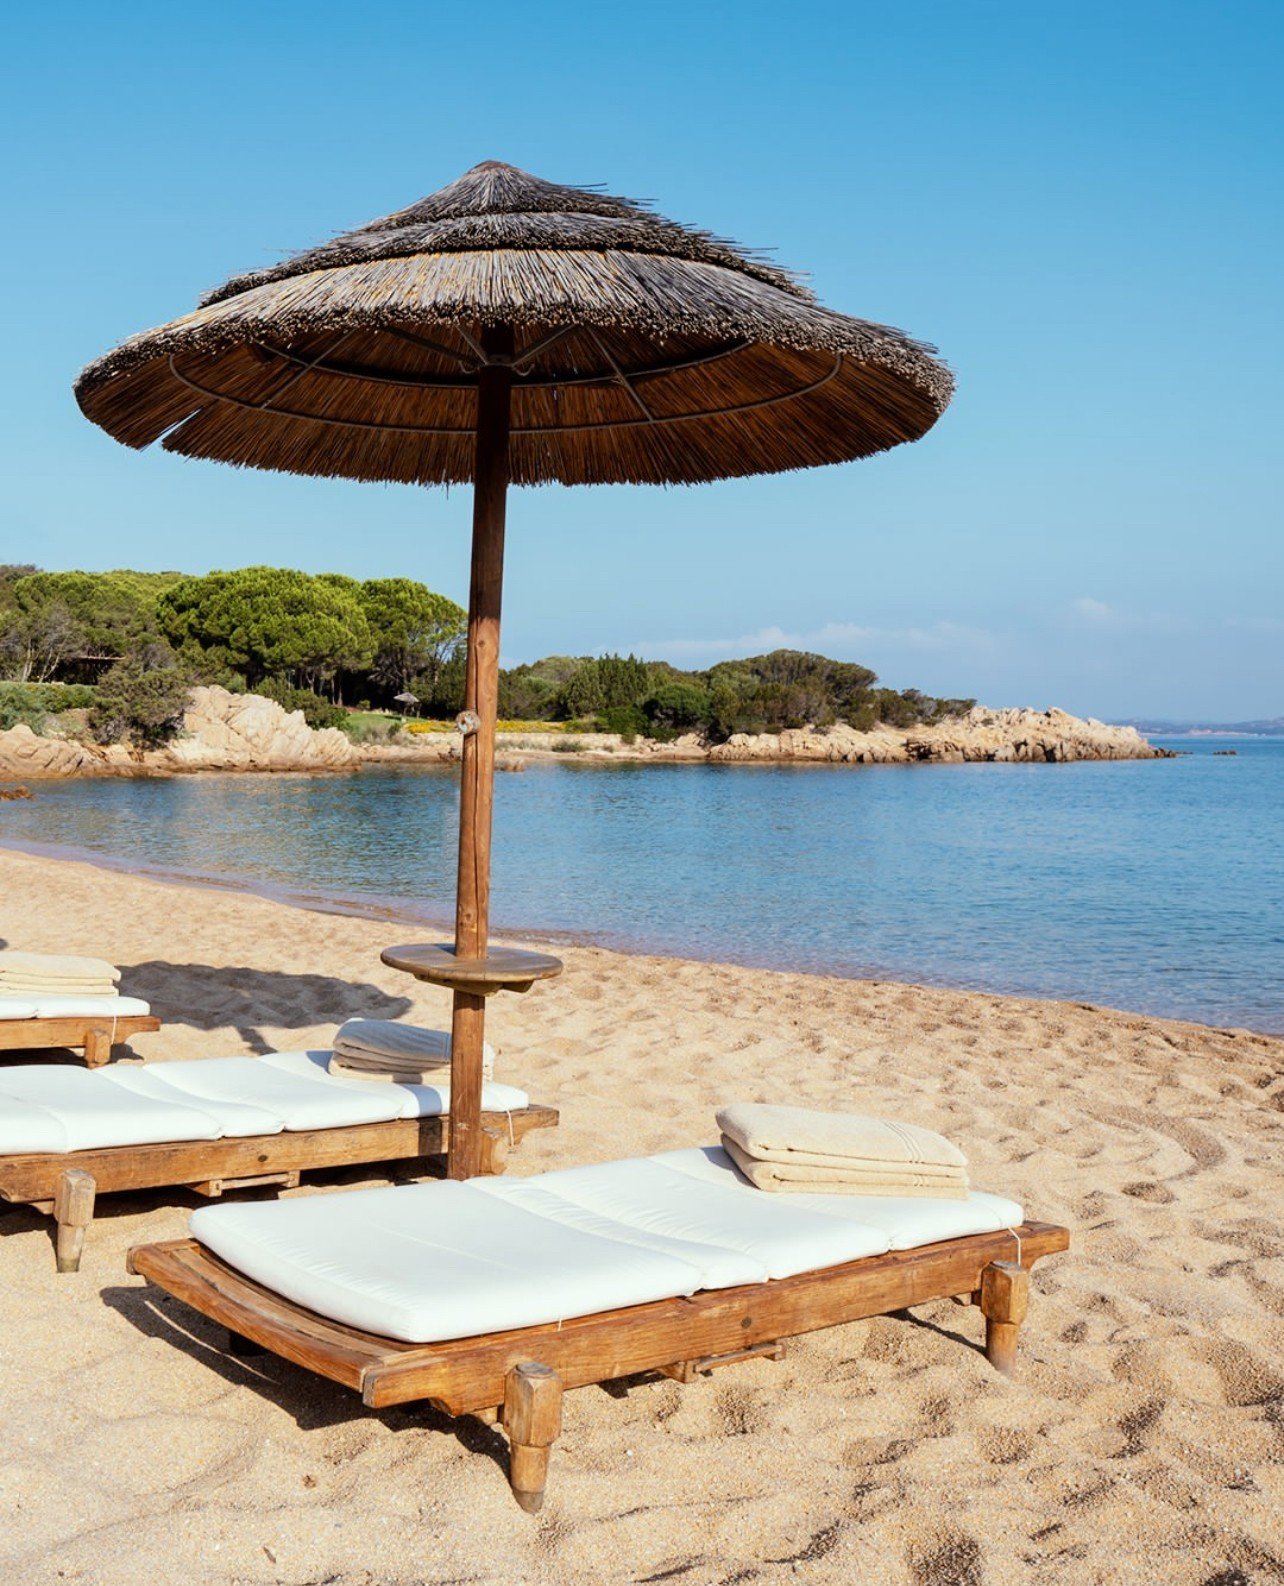 Discovering paradise in Sardinia @hotelpitrizza where azure waters meet pristine beaches. 🏖️ We&rsquo;re seeing an uptick in #Sardinia requests as travelers look to explore beyond the ever popular Amalfi Coast. Have you given thought to Sardinia? 

